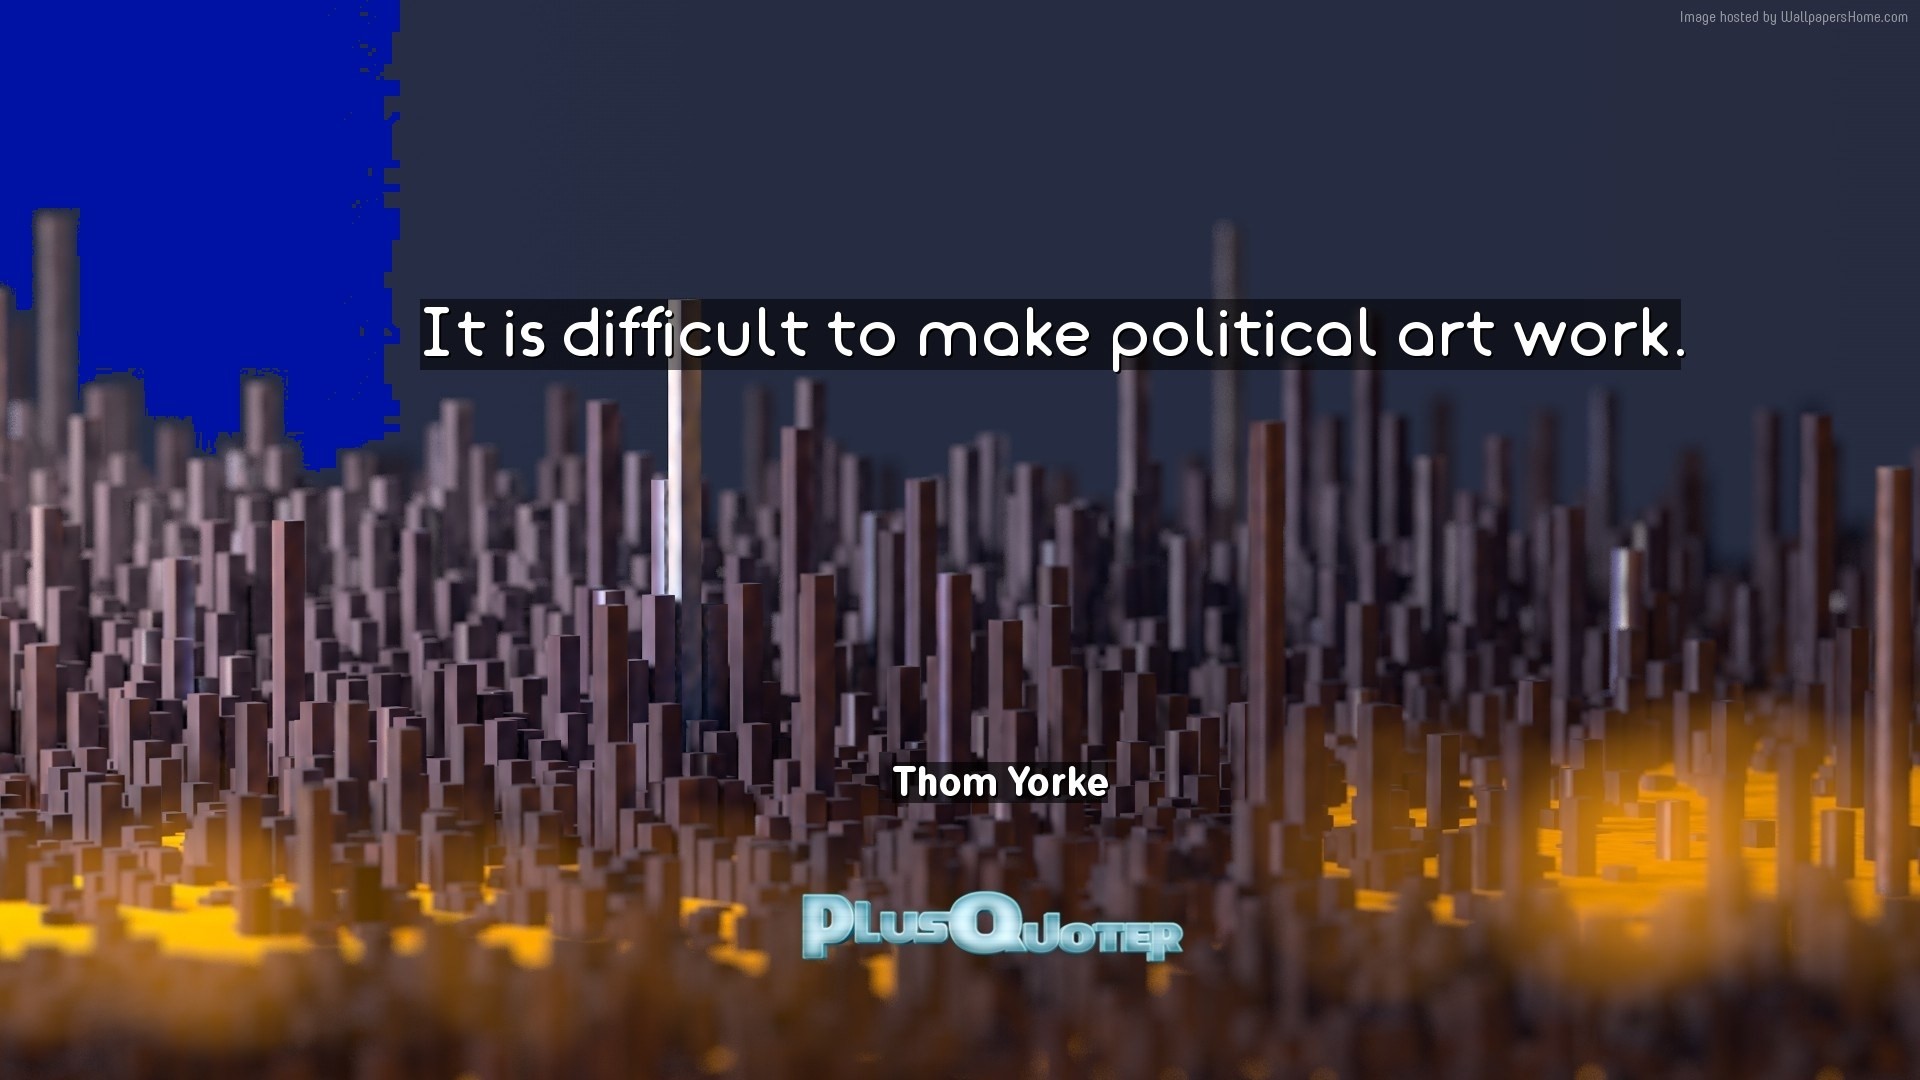 1920x1080 Download Wallpaper with inspirational Quotes- "It is difficult to make  political art work.